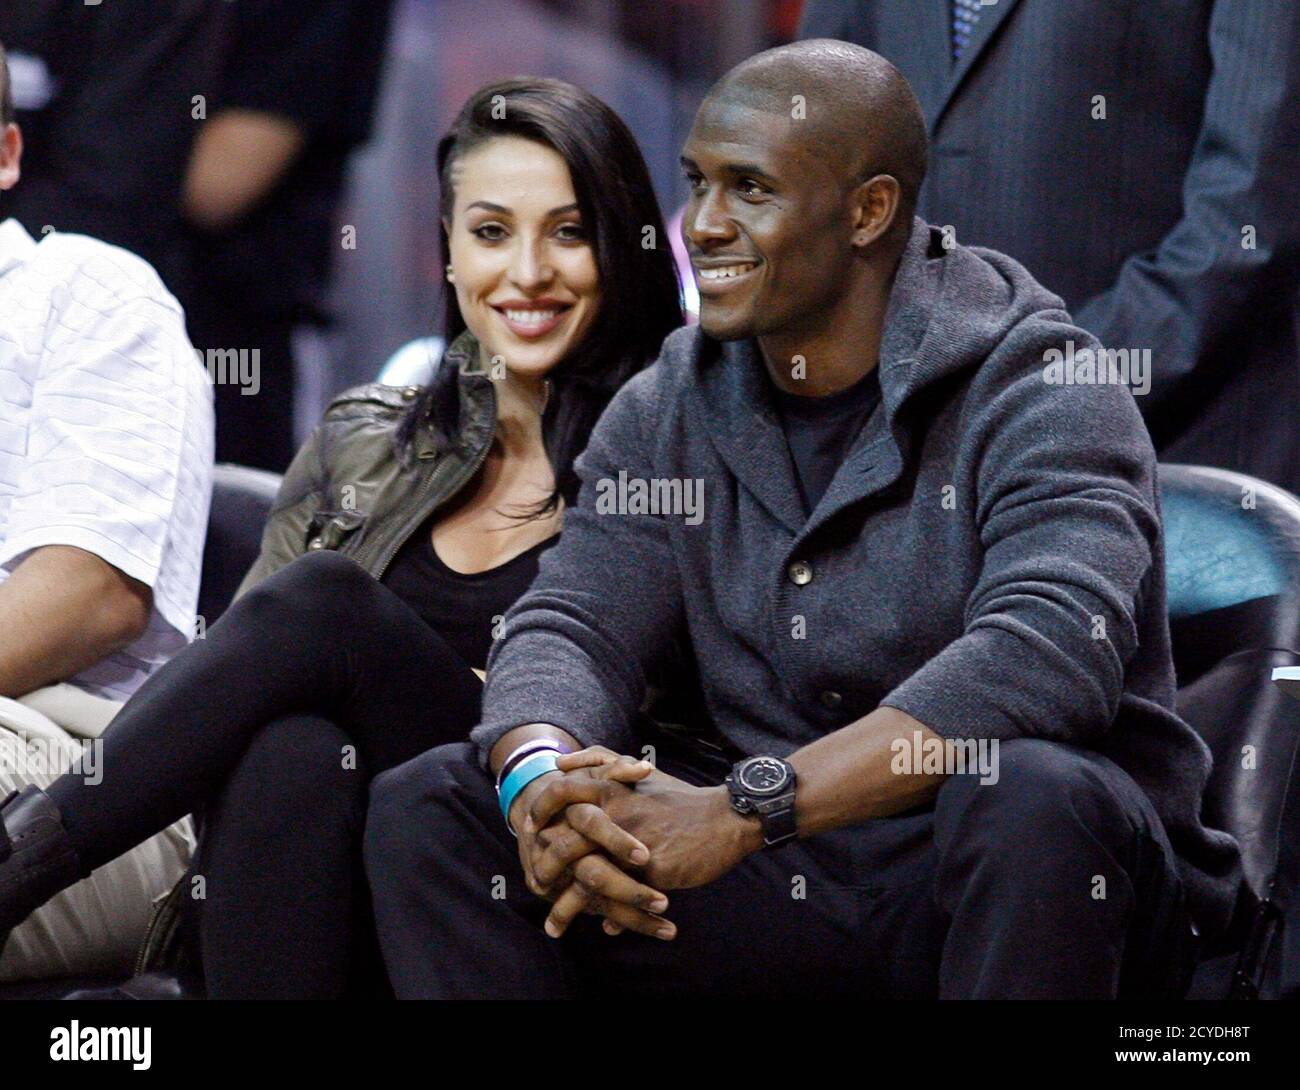 Miami Dolphins running back Reggie Bush sits courtside with Lilit Avagyan as the Miami Heat met the Boston Celtics in their NBA basketball game in Miami, Florida October 30, 2012.    REUTERS/Andrew Innerarity  (UNITED STATES - Tags: SPORT BASKETBALL FOOTBALL) Stock Photo